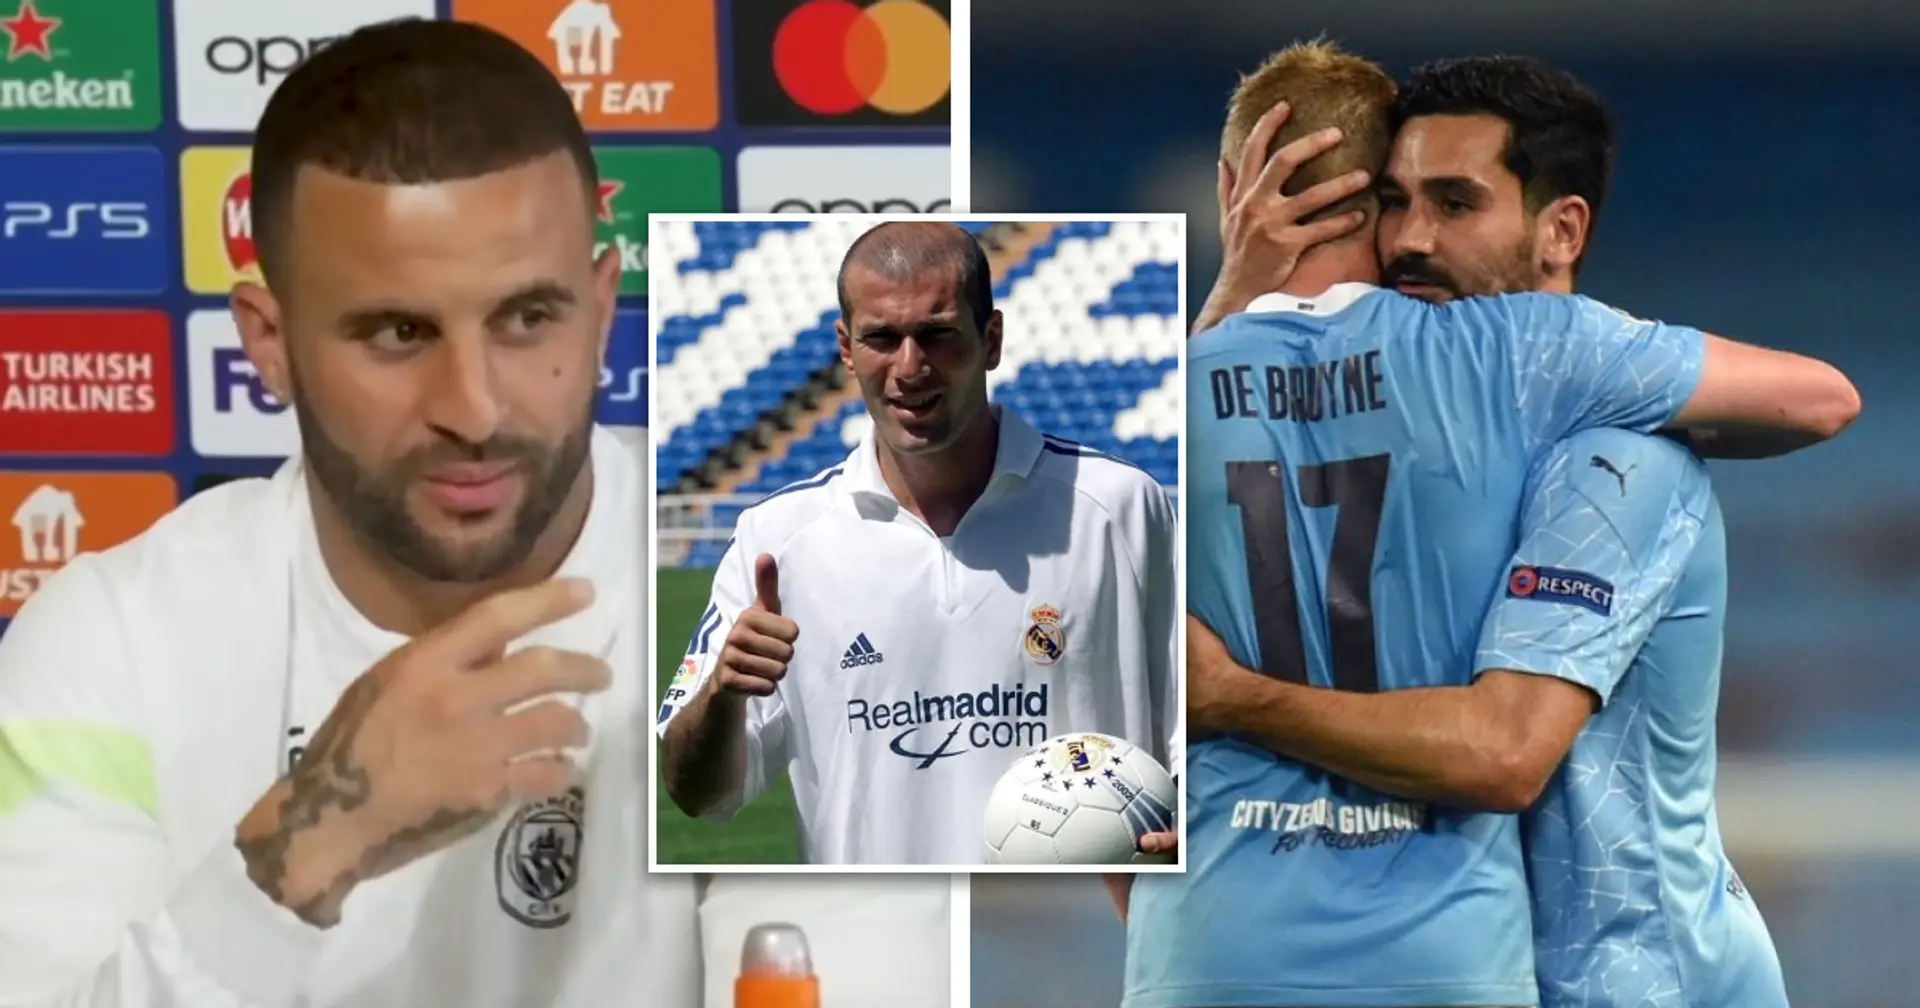 'He turns into prime Zidane in the last few months': Kyle Walker on one of his teammates 